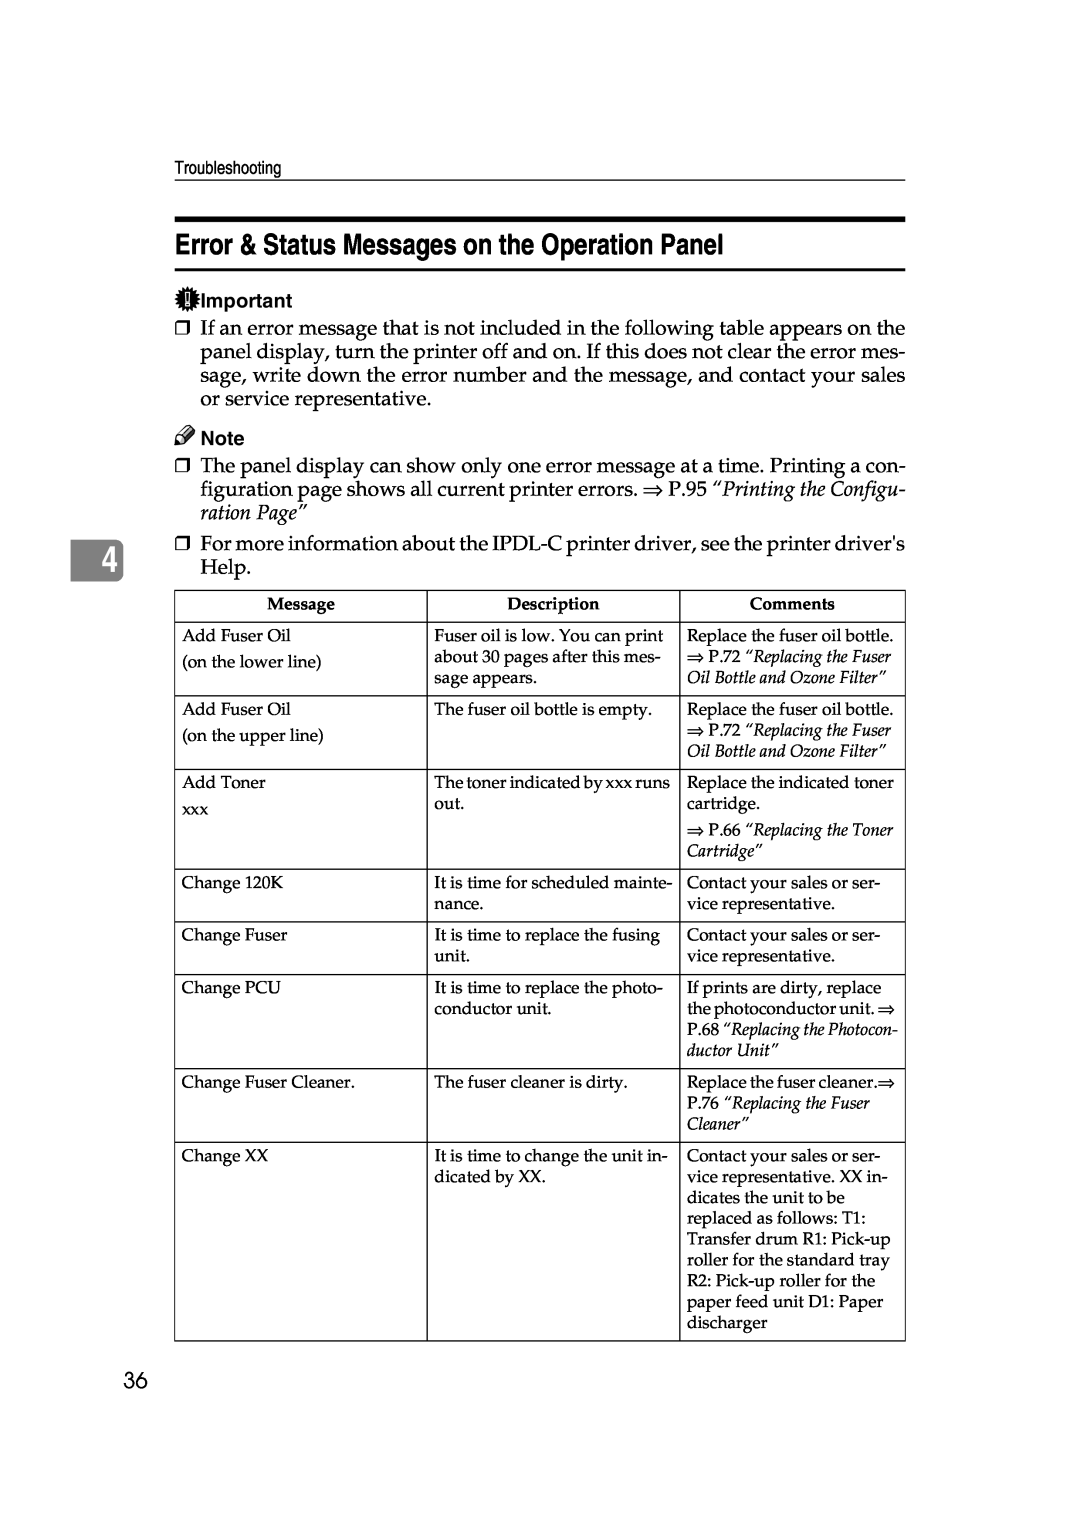 Lanier AP206 manual Error & Status Messages on the Operation Panel 